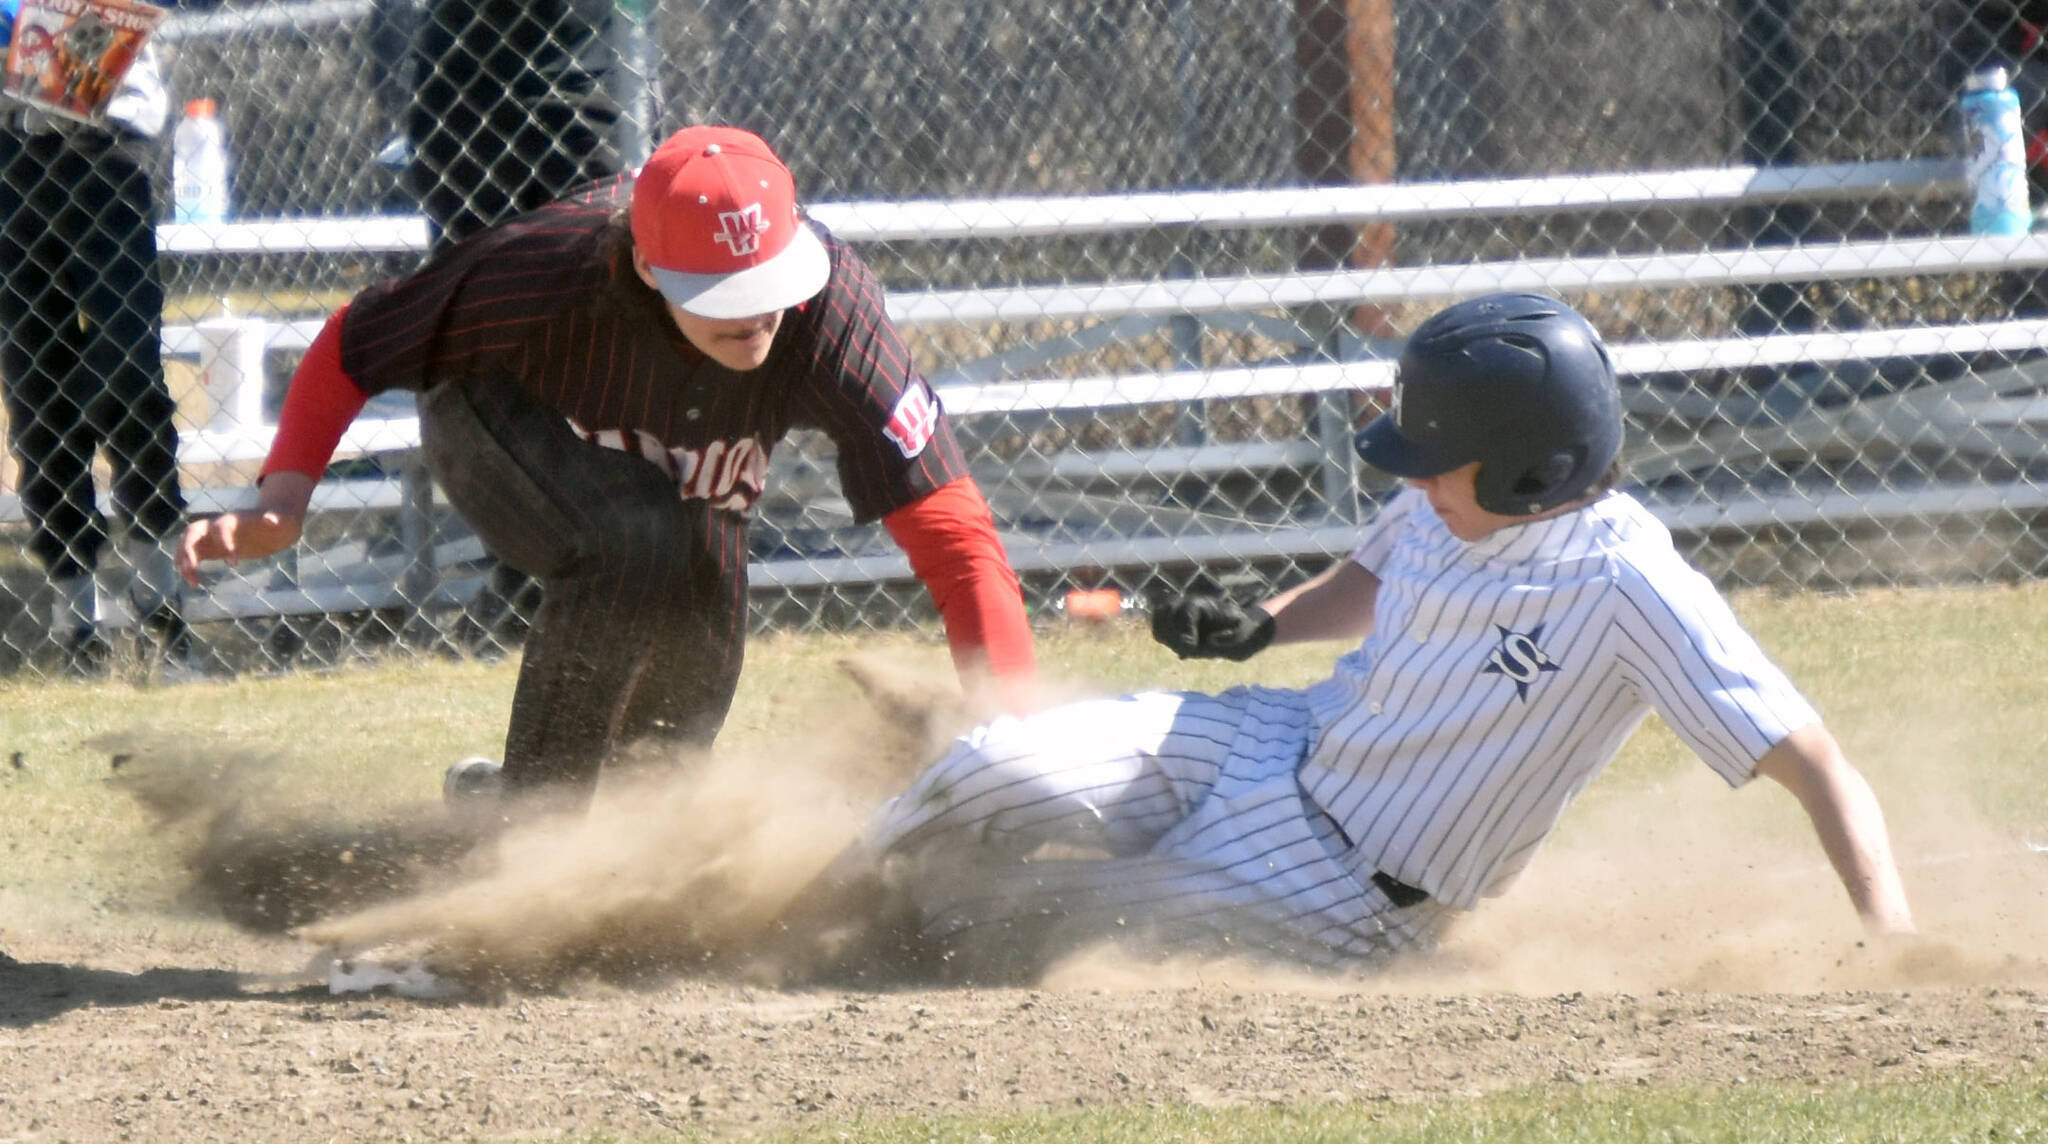 Wasilla third baseman Logan Bean tags out Soldotna’s Levi Mickelson on Saturday, May 13, 2023, at the Soldotna Little League fields in Soldotna, Alaska. (Photo by Jeff Helminiak/Peninsula Clarion)